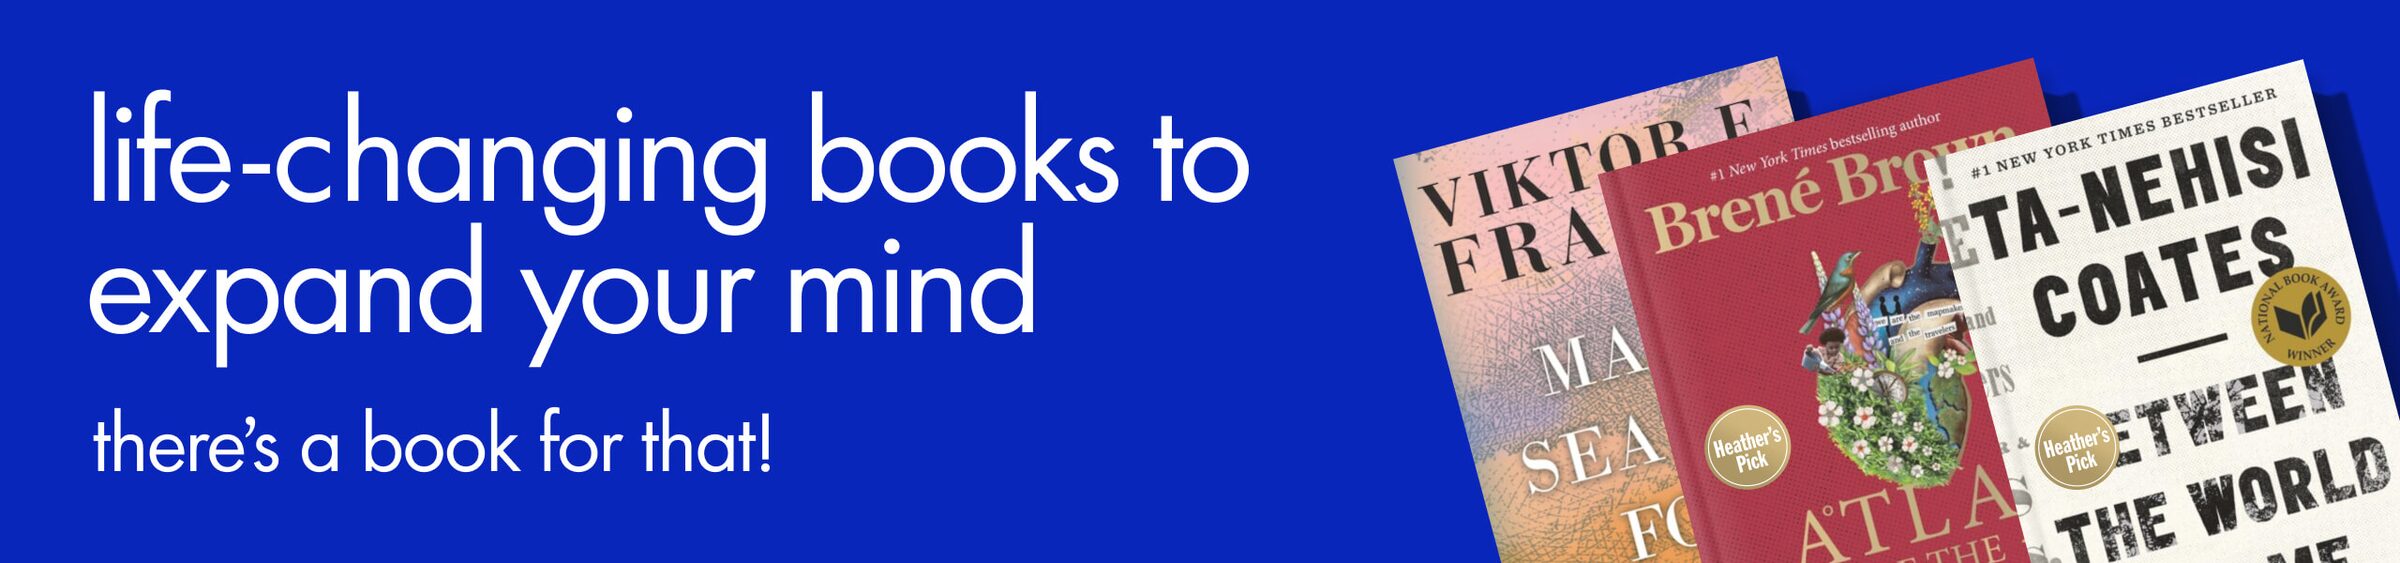 There's a Book for That - Life-changing books to expand your mind